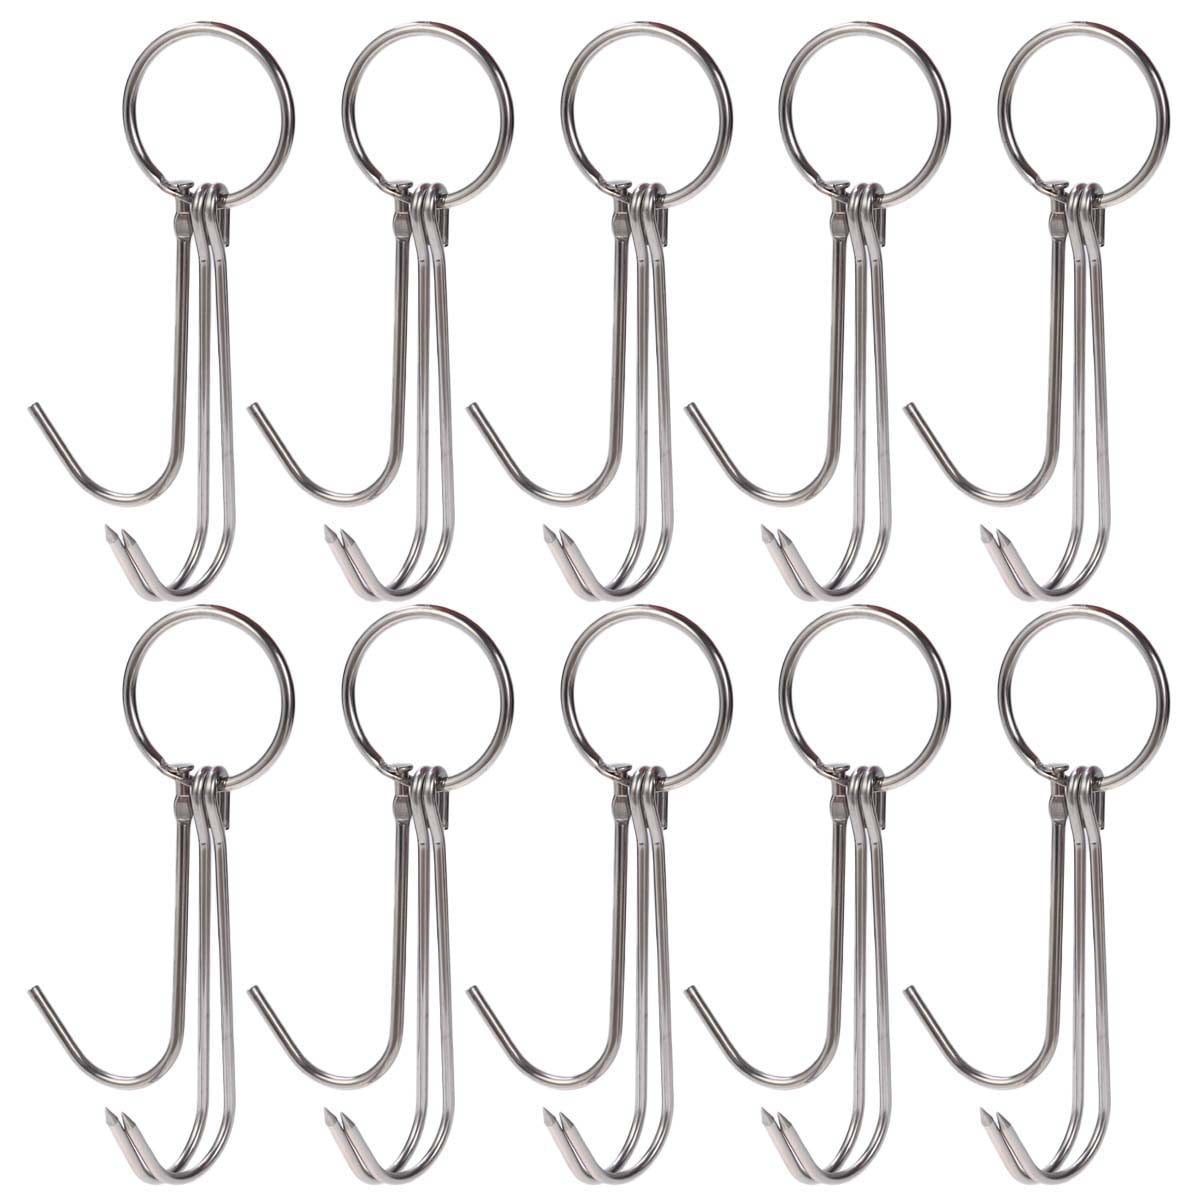 Hooks Stainless Steel Processing for Butchers Hunters Meat Hanging and Smoking for sale online 